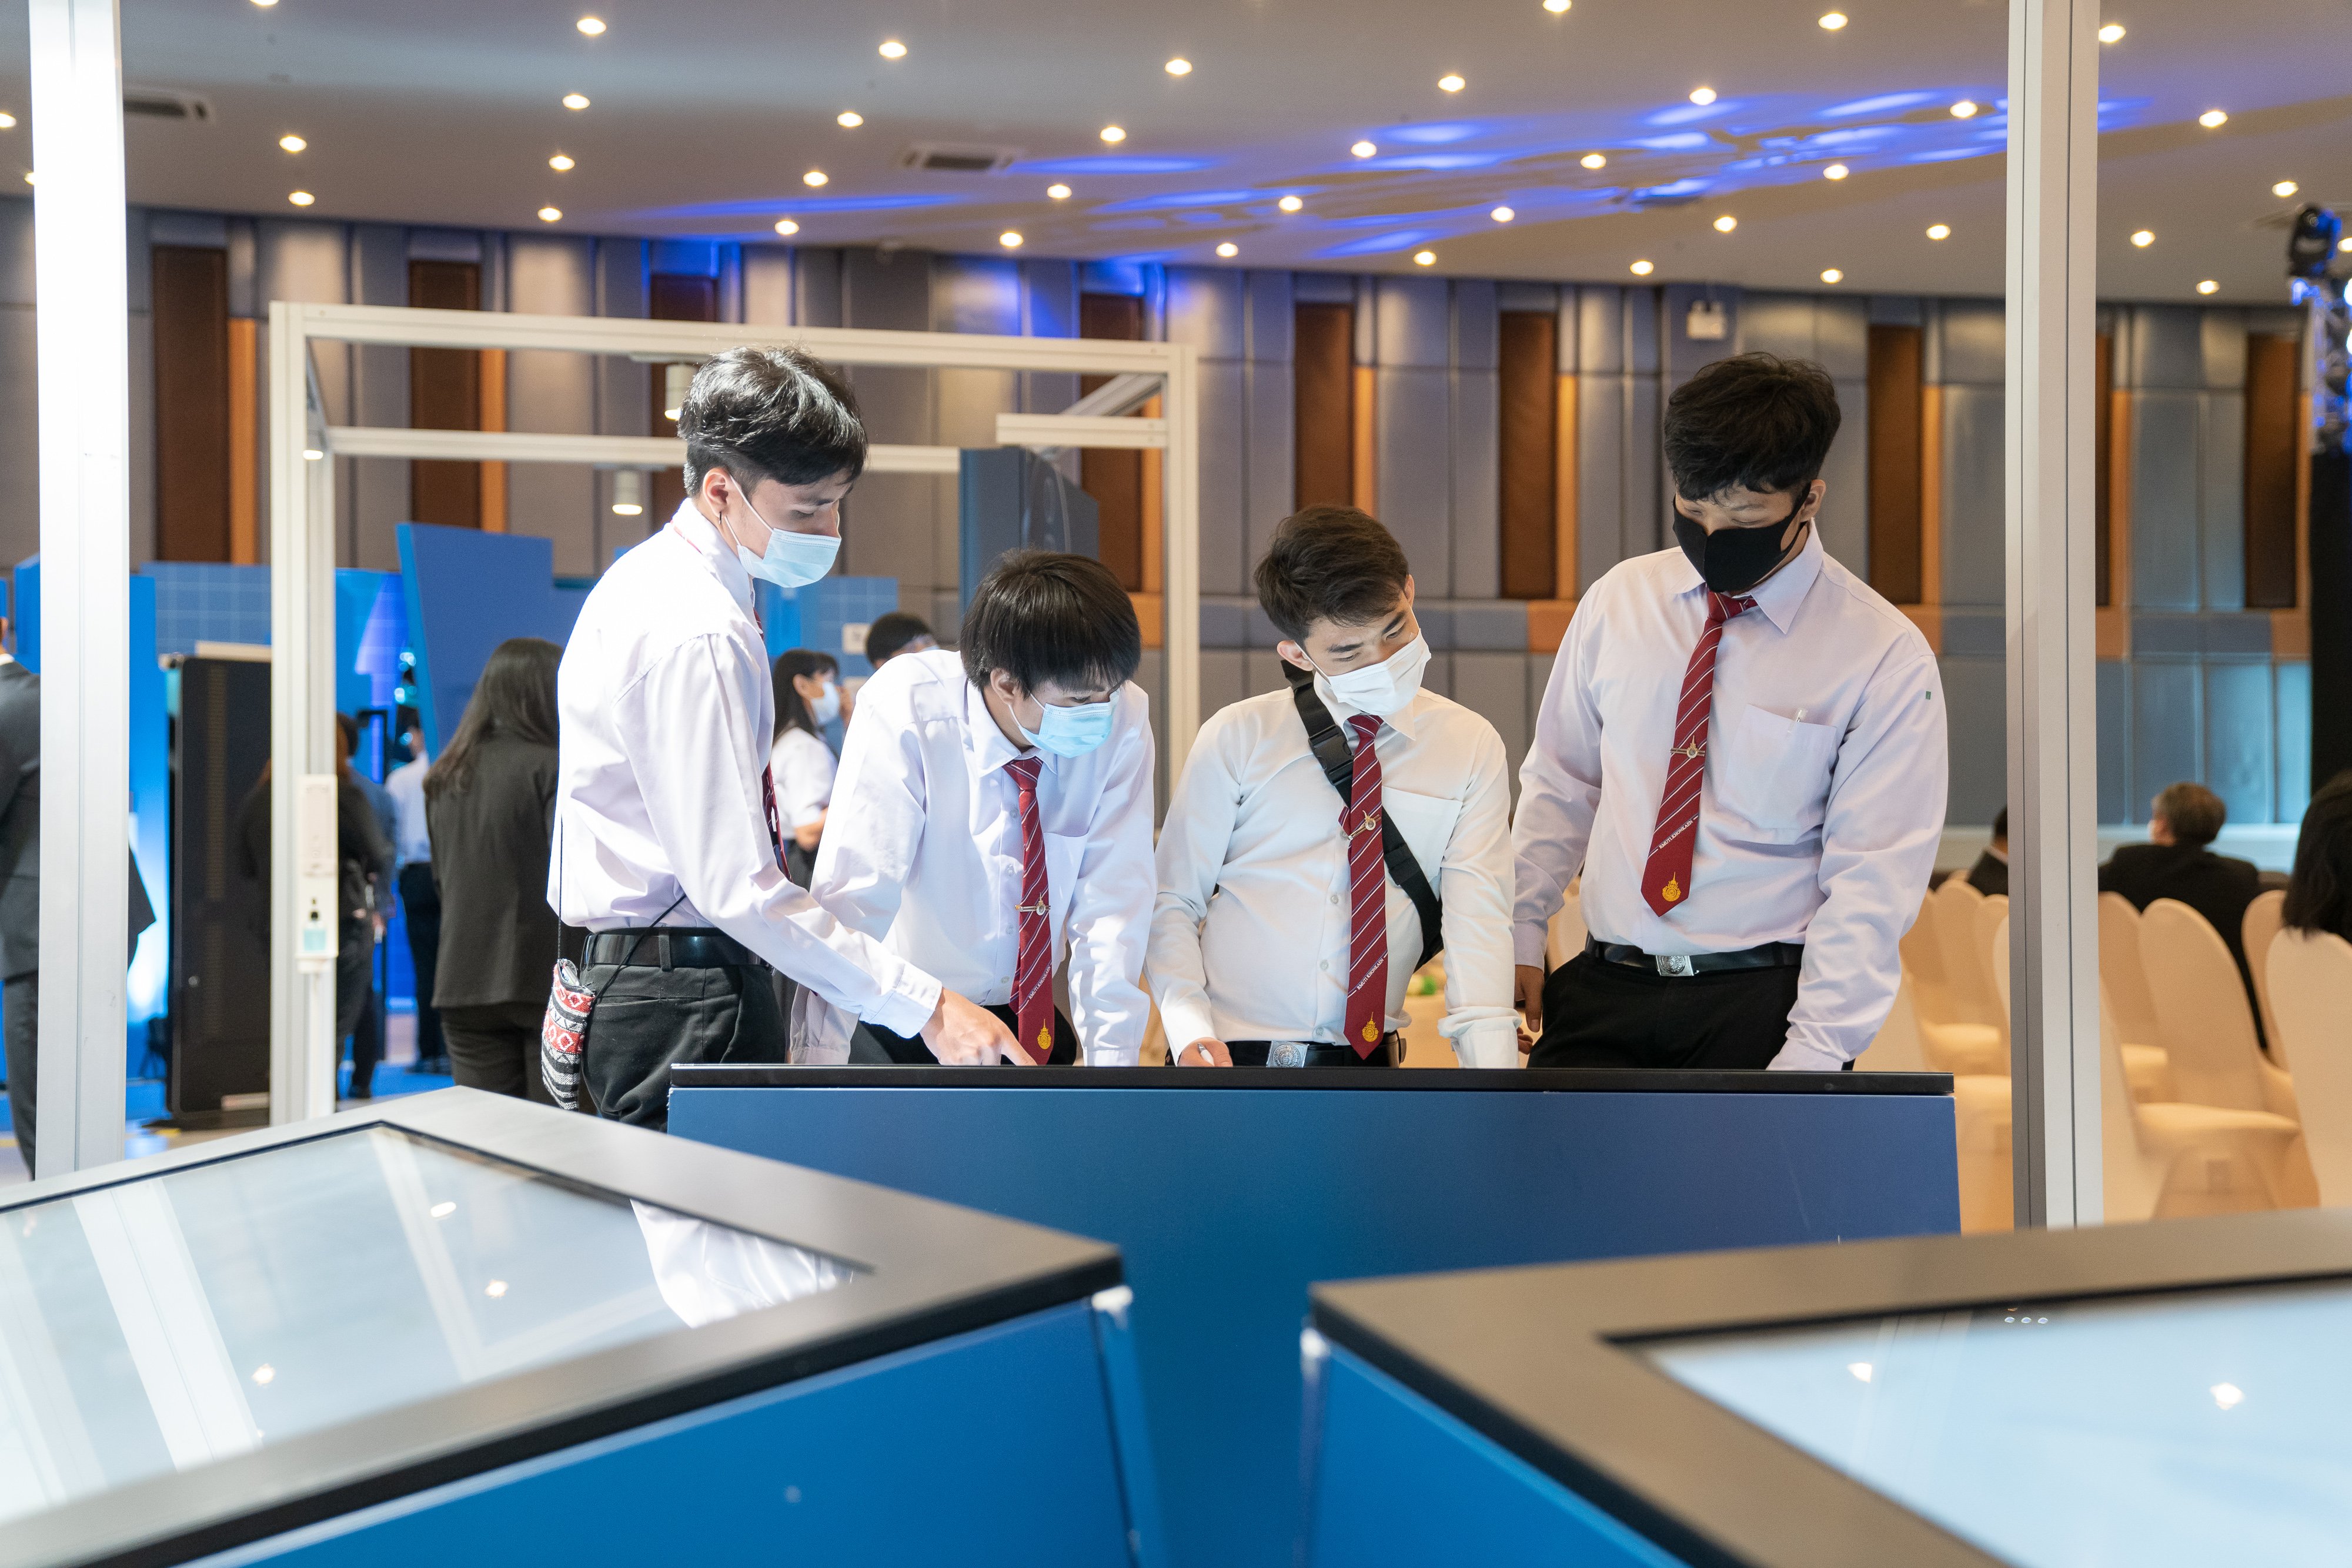 Four male students from Bangkok are standing at blue waist-heigh cube with touch screen of the station "mobility" and inform themselves about the mobility transition. March 2021.